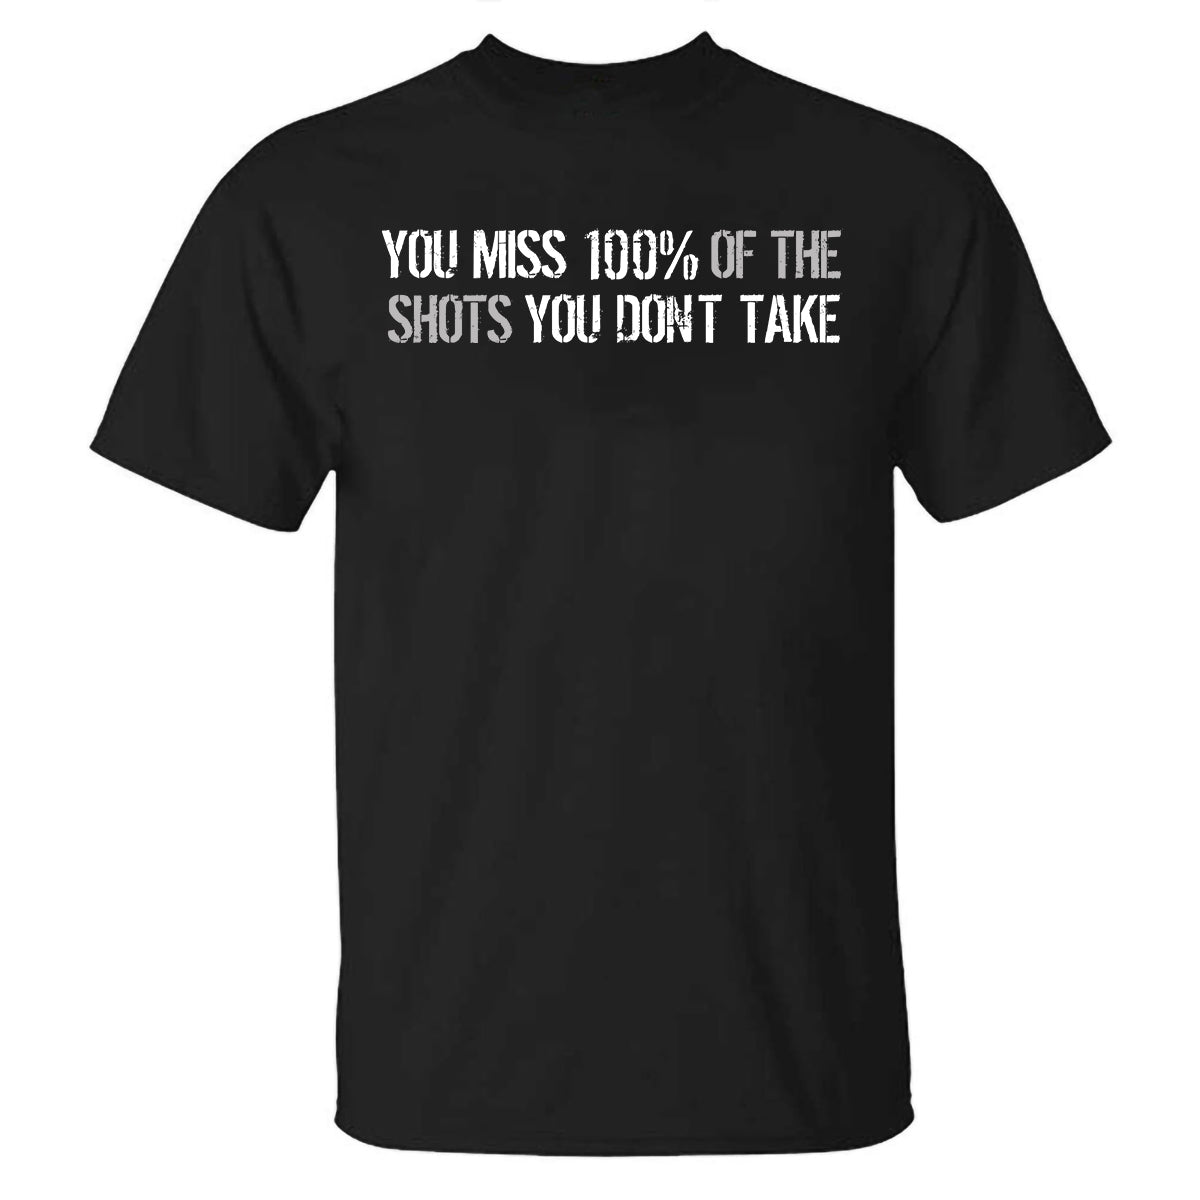 GrootWear You Miss 100% Of The Shots You Don't Take Printed T-shirt